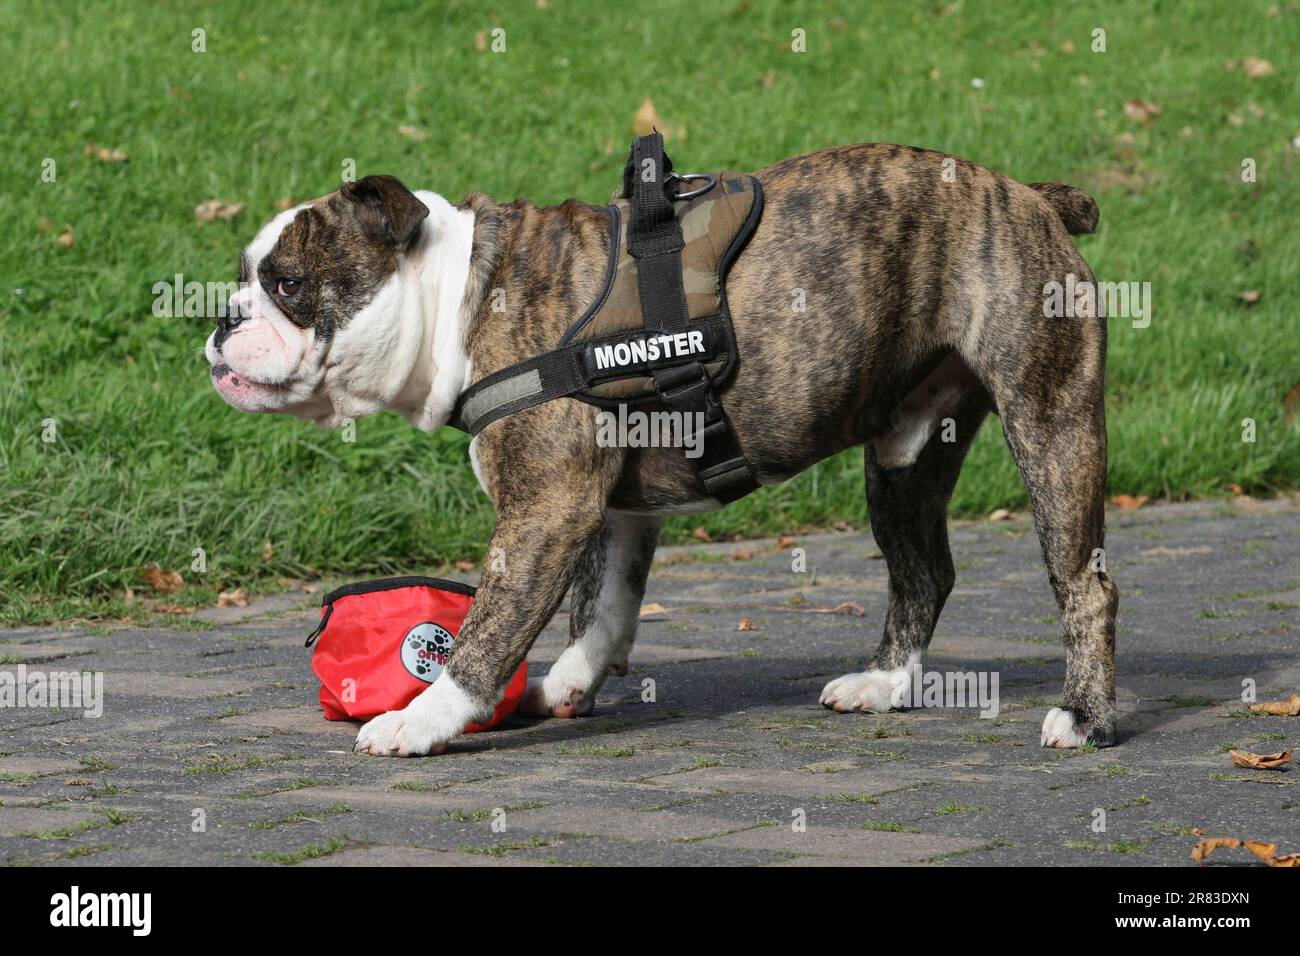 Bulldog anglais Drinking from a Foldable Drink Box dans le parc Banque D'Images